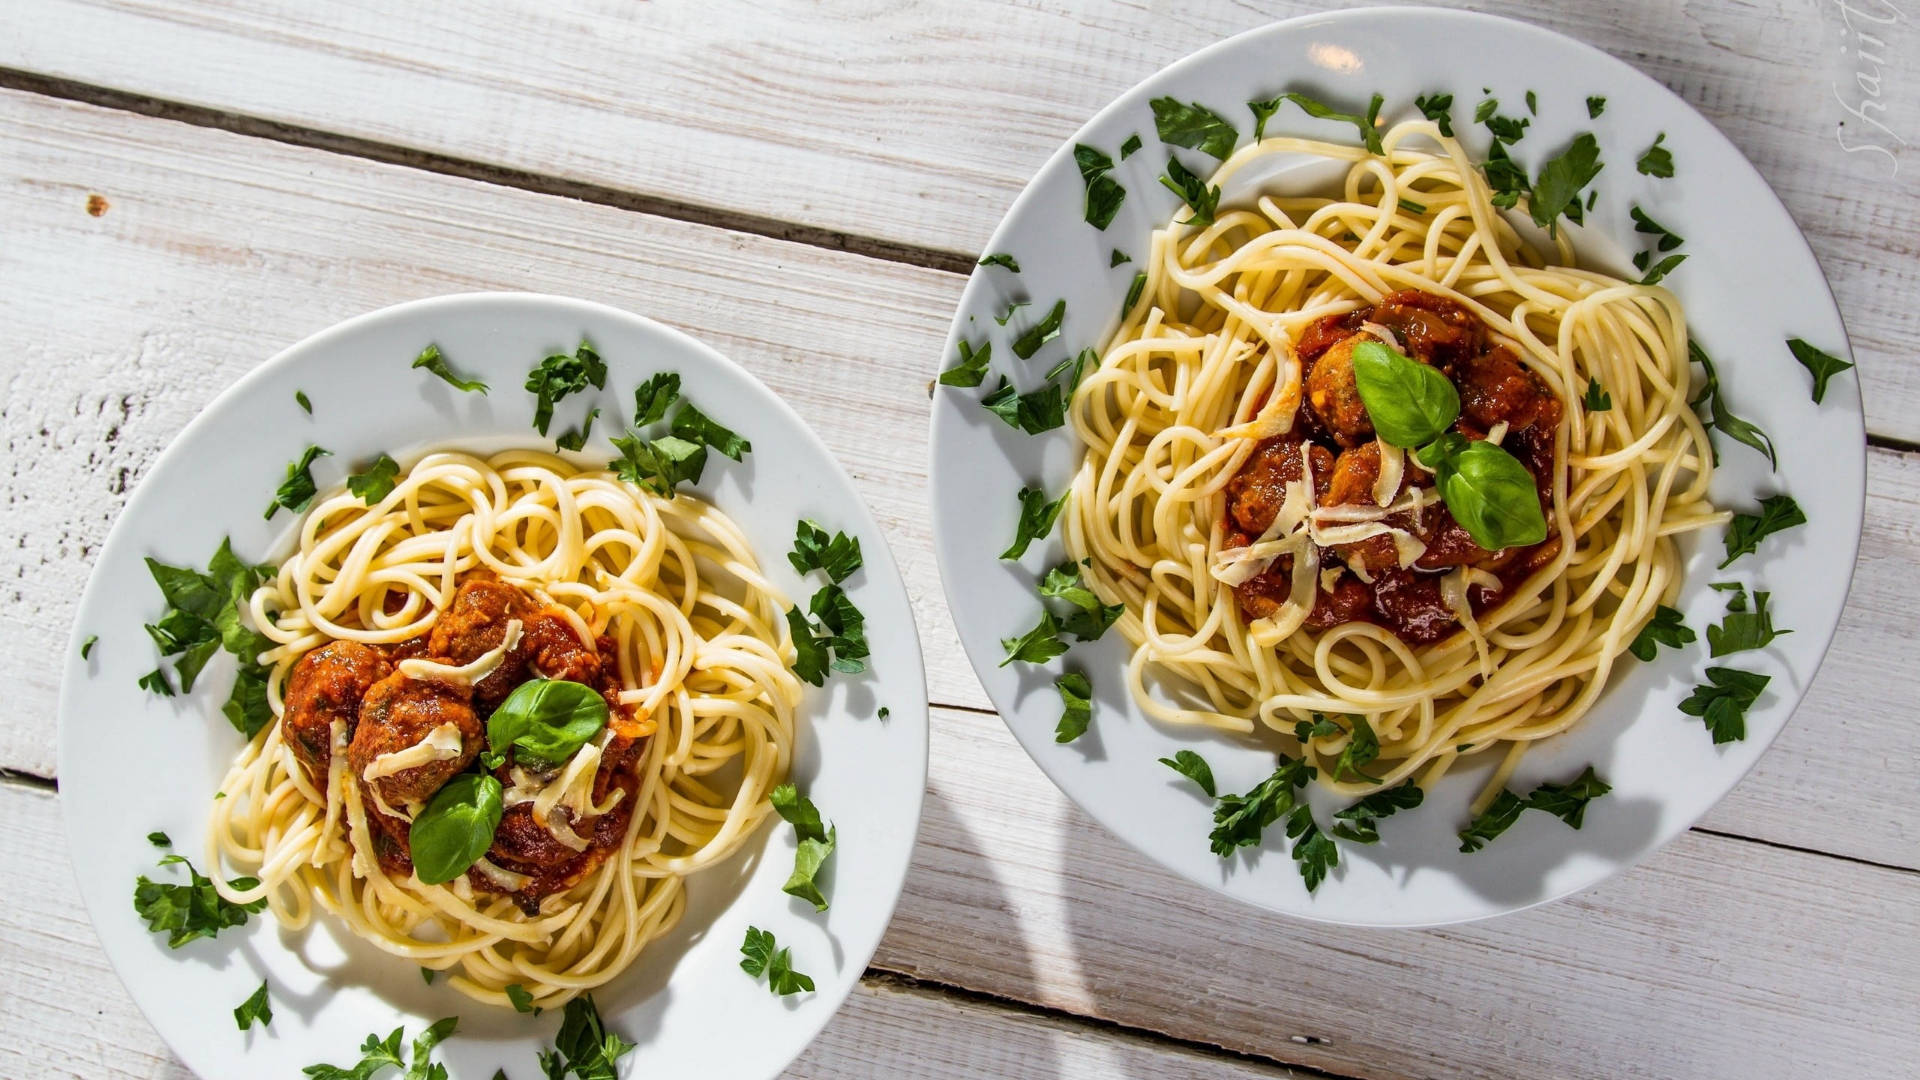 Scrumptious Italian Pasta Served On Two Plates Background